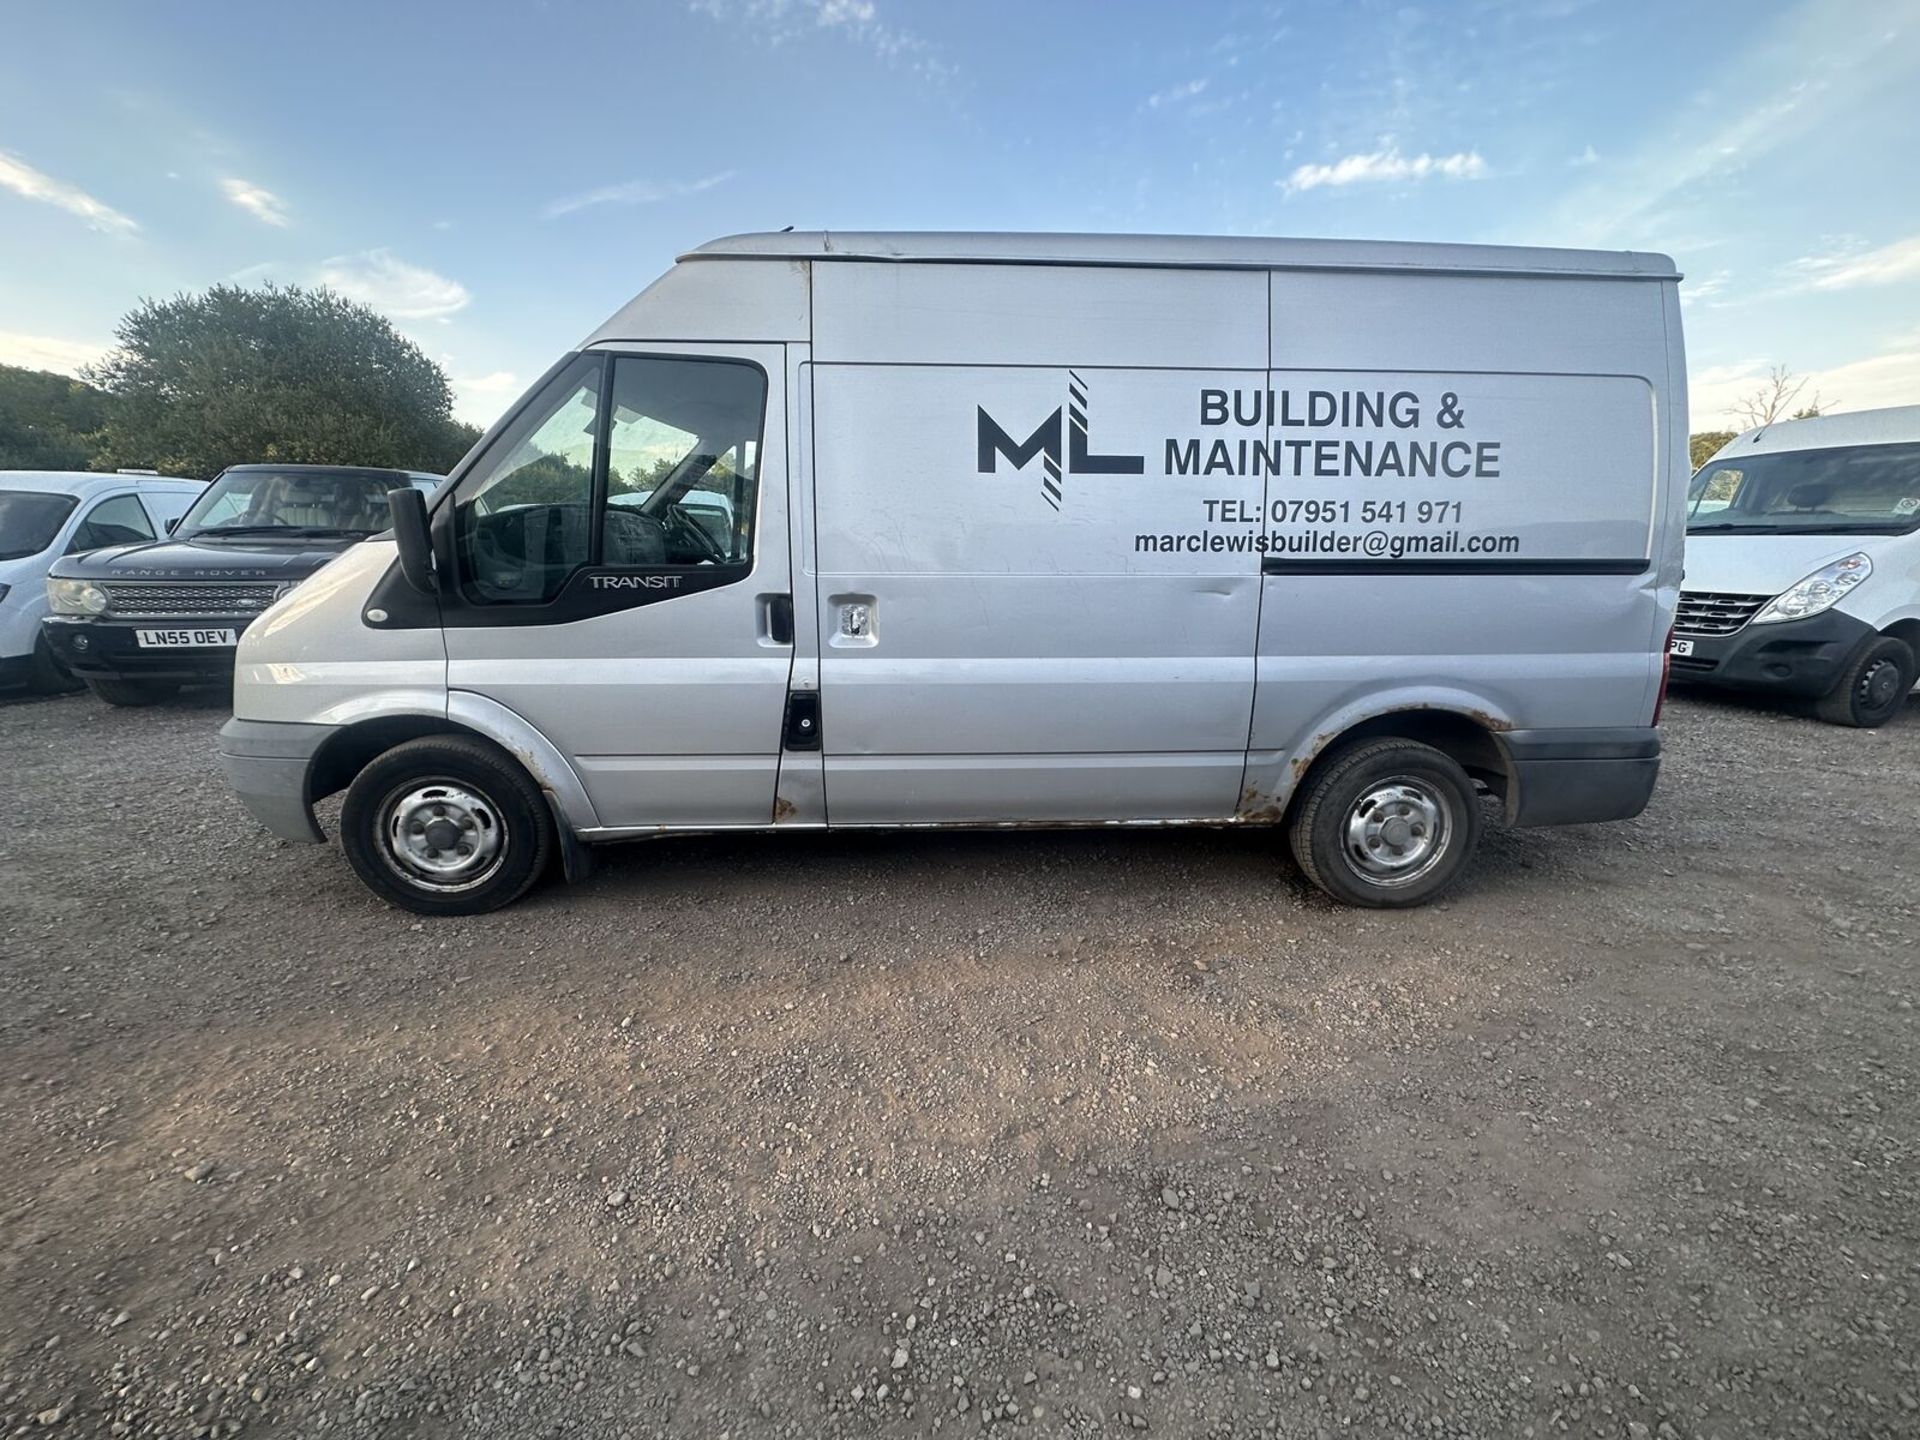 RELIABLE 56 PLATE FORD TRANSIT 110: CLEAN INTERIOR, STRONG PERFORMANCE, IDEAL WORK COMPANION" - Bild 2 aus 14